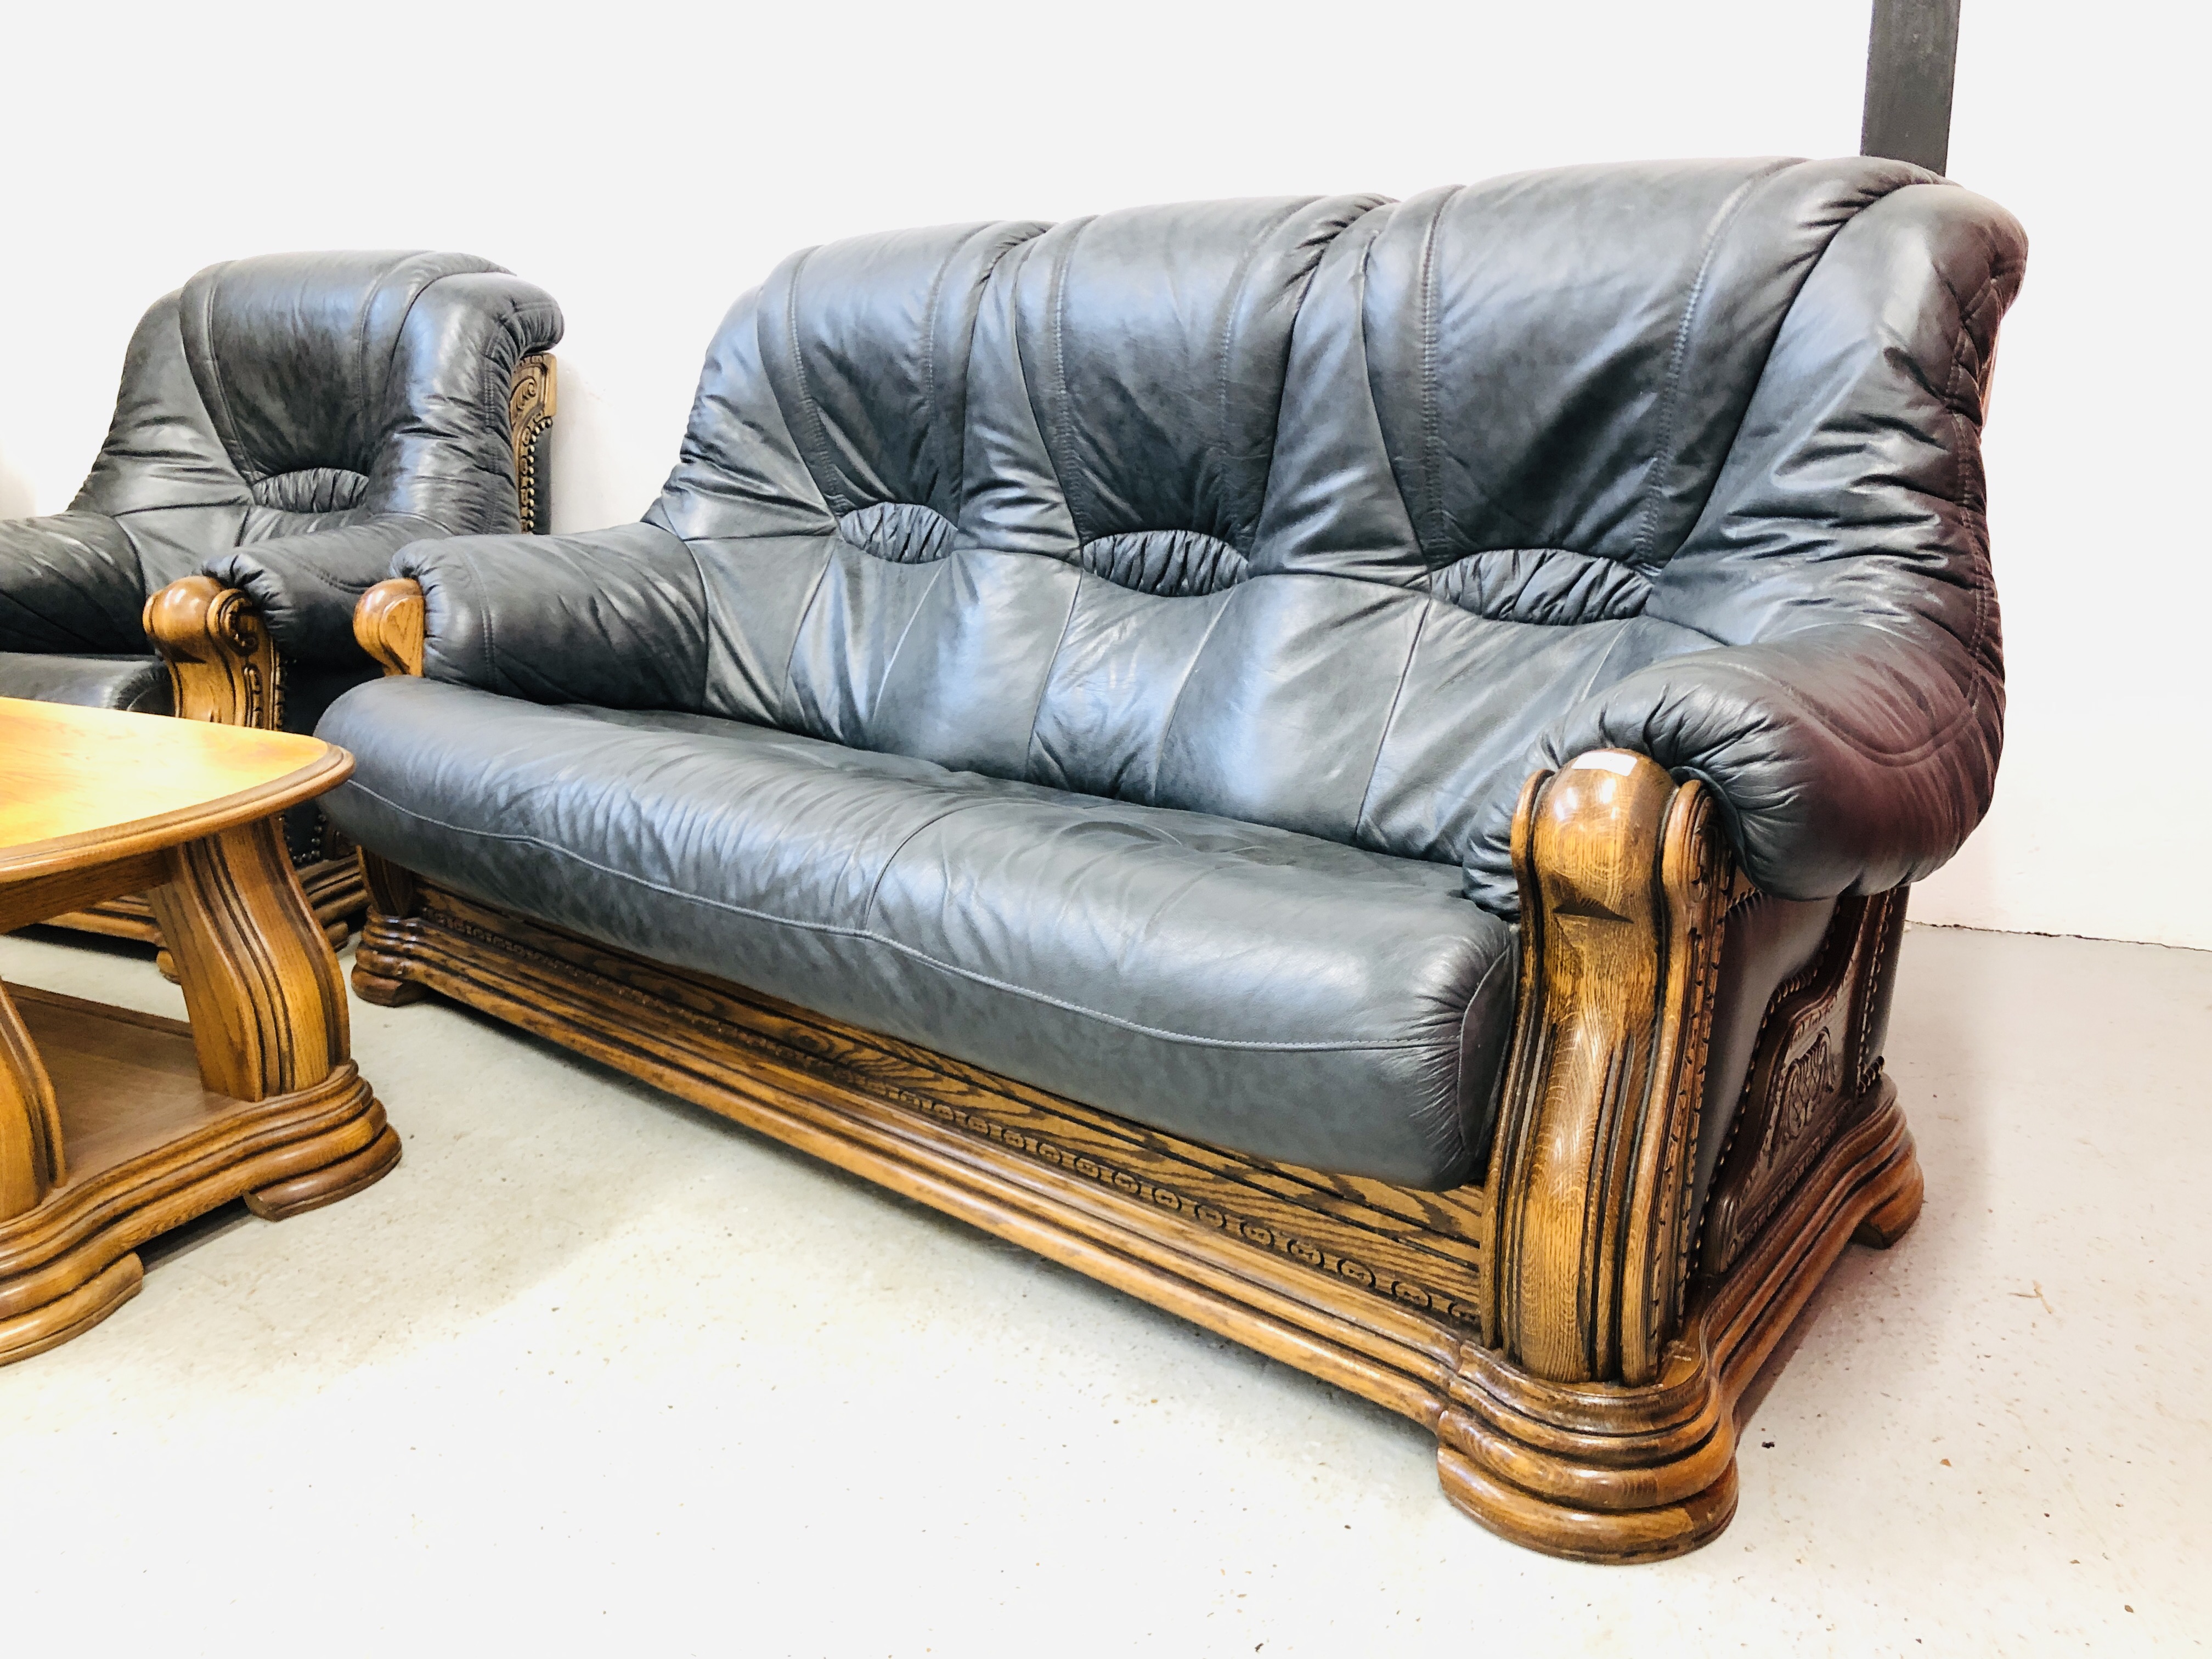 A NAVY BLUE 3 SEATER SOFA AND ARM CHAIR WITH CARVED WOOD SURROUND AND MATCHING OAK COFFEE TABLE - Image 5 of 13